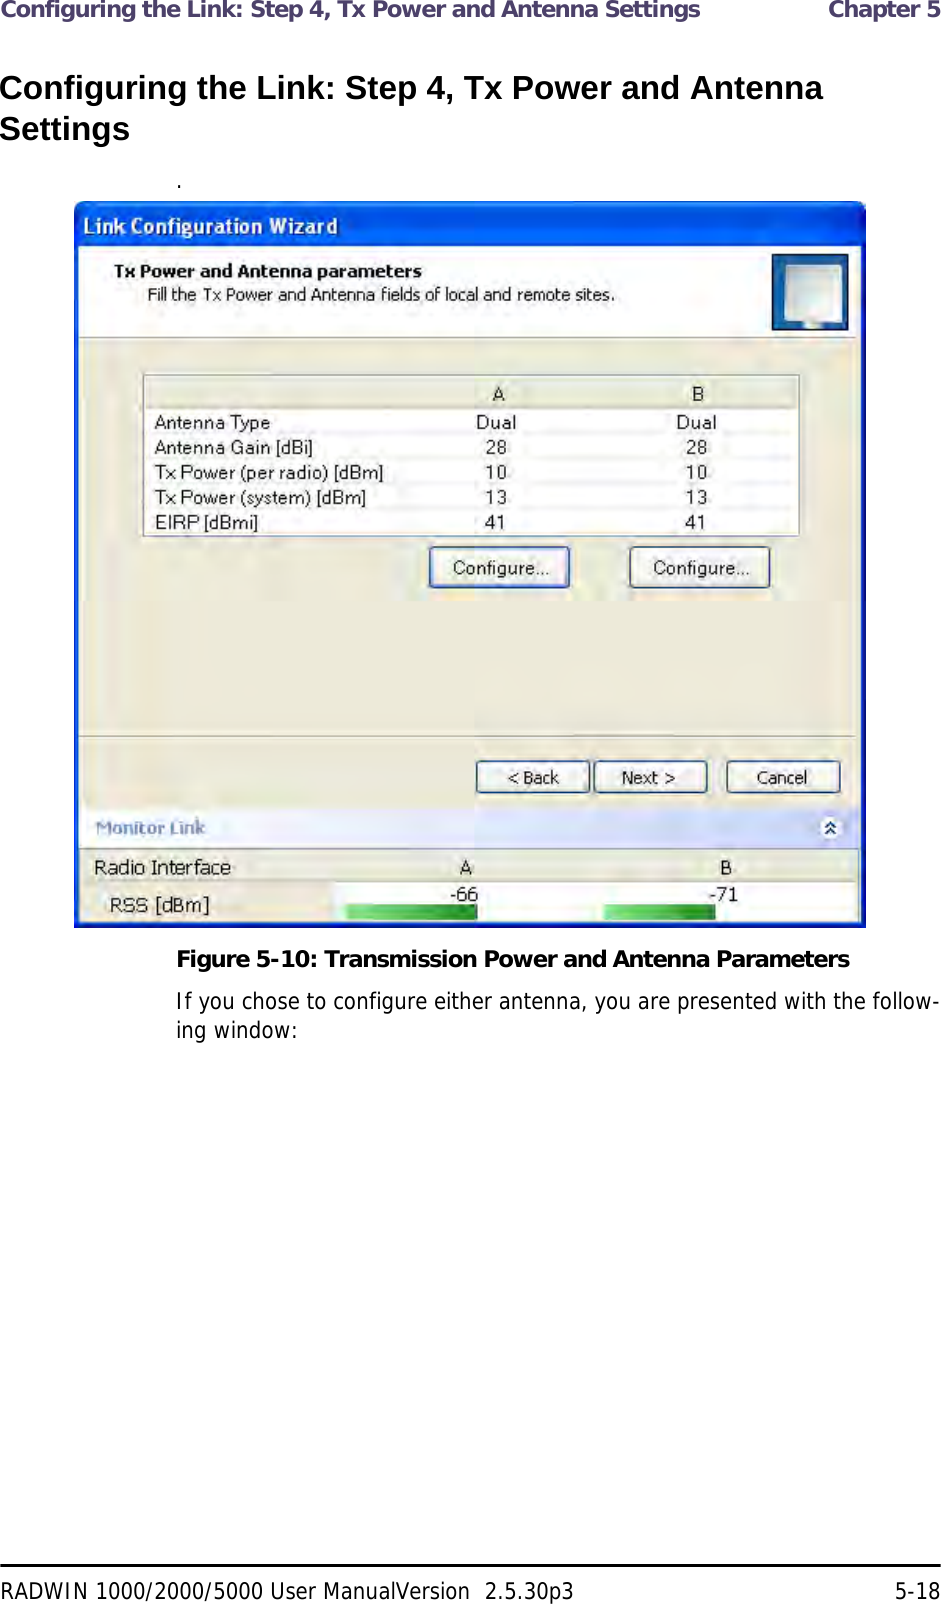 Configuring the Link: Step 4, Tx Power and Antenna Settings  Chapter 5RADWIN 1000/2000/5000 User ManualVersion  2.5.30p3 5-18Configuring the Link: Step 4, Tx Power and Antenna Settings.Figure 5-10: Transmission Power and Antenna ParametersIf you chose to configure either antenna, you are presented with the follow-ing window: